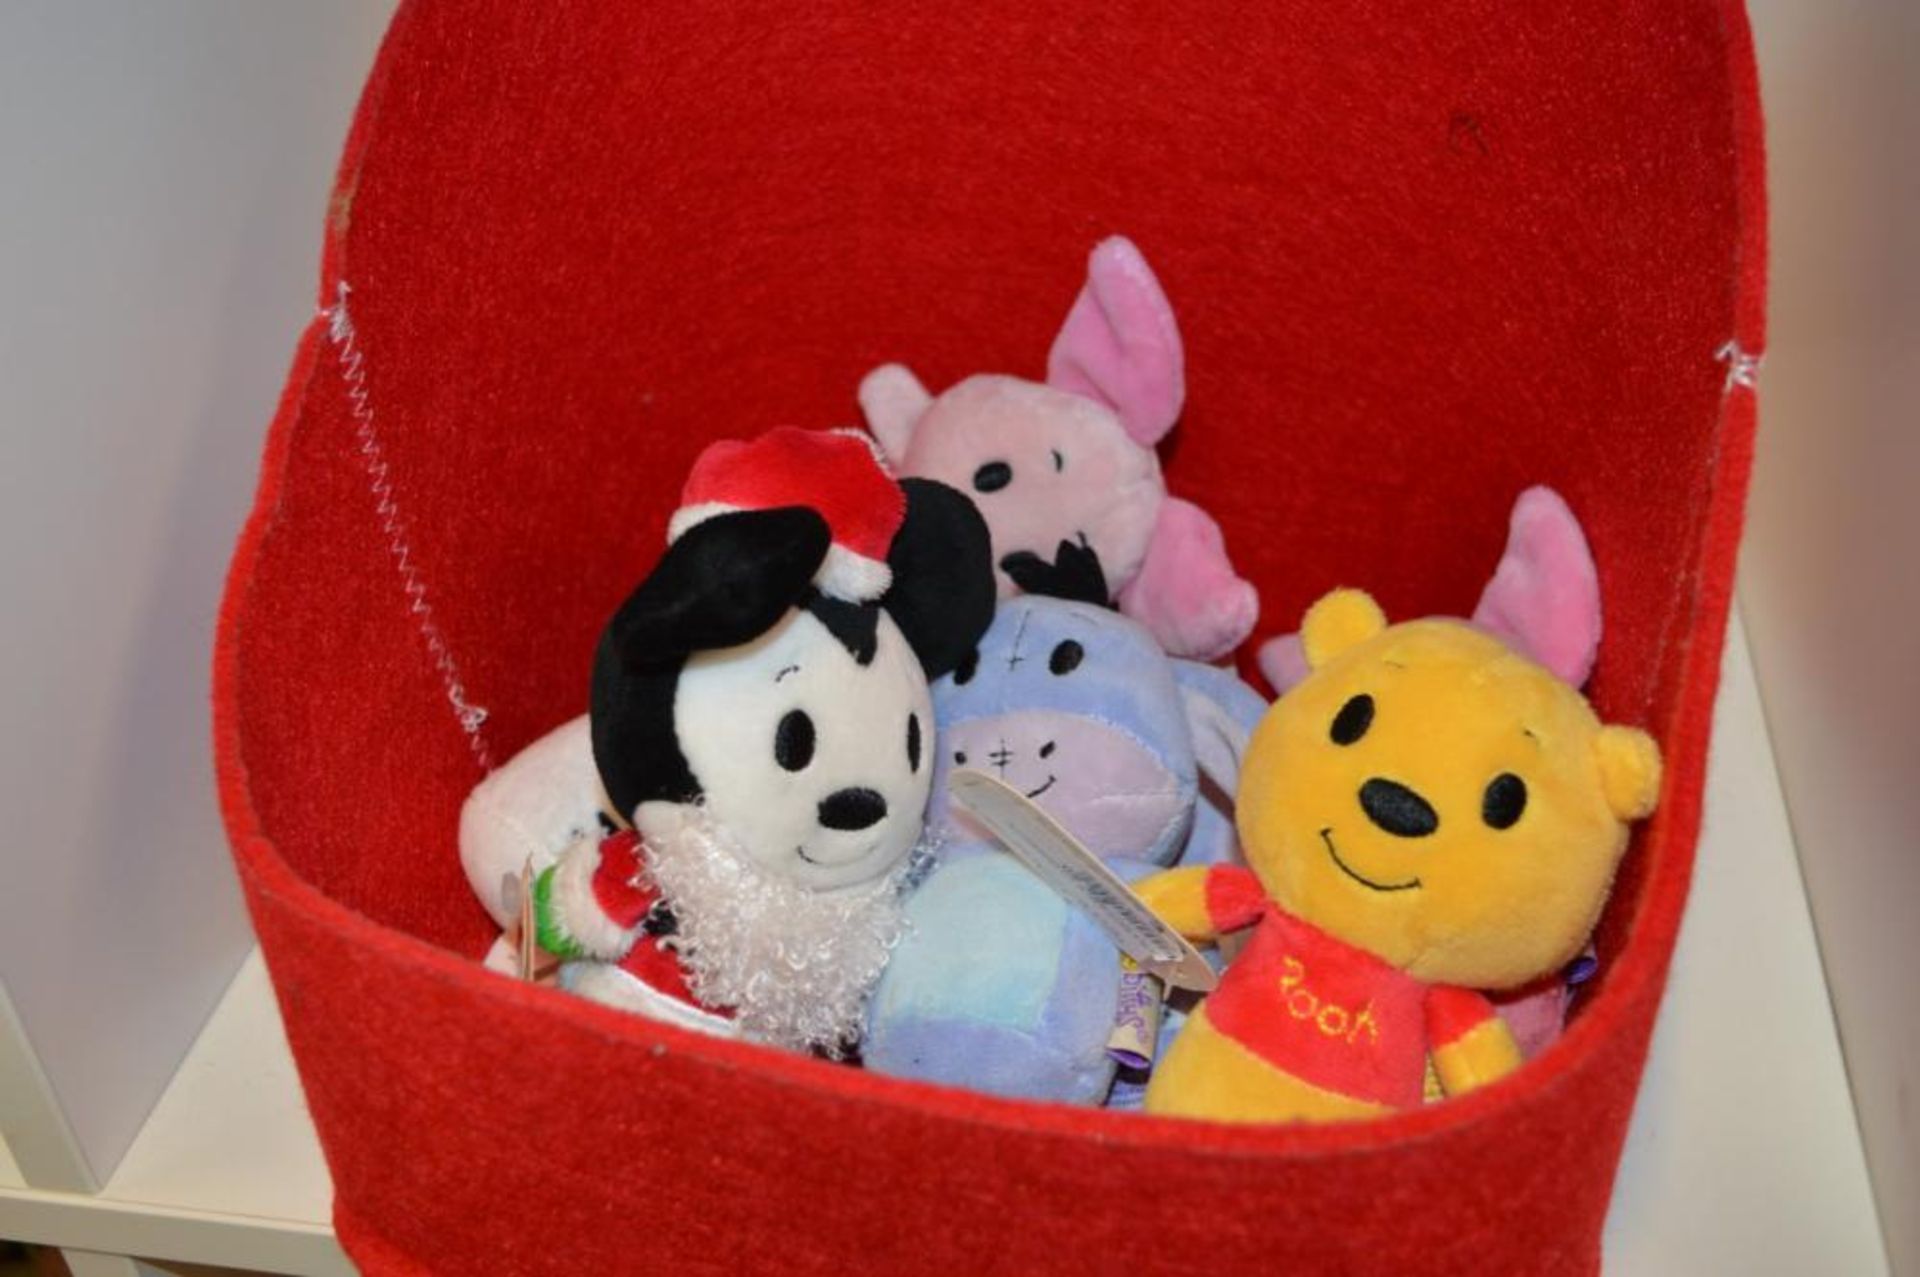 Approx 100 x Hallmark Itty Bittsy Character Soft Toys With 18 x Storage Baskets - Ref BB - CL351 - L - Image 4 of 19